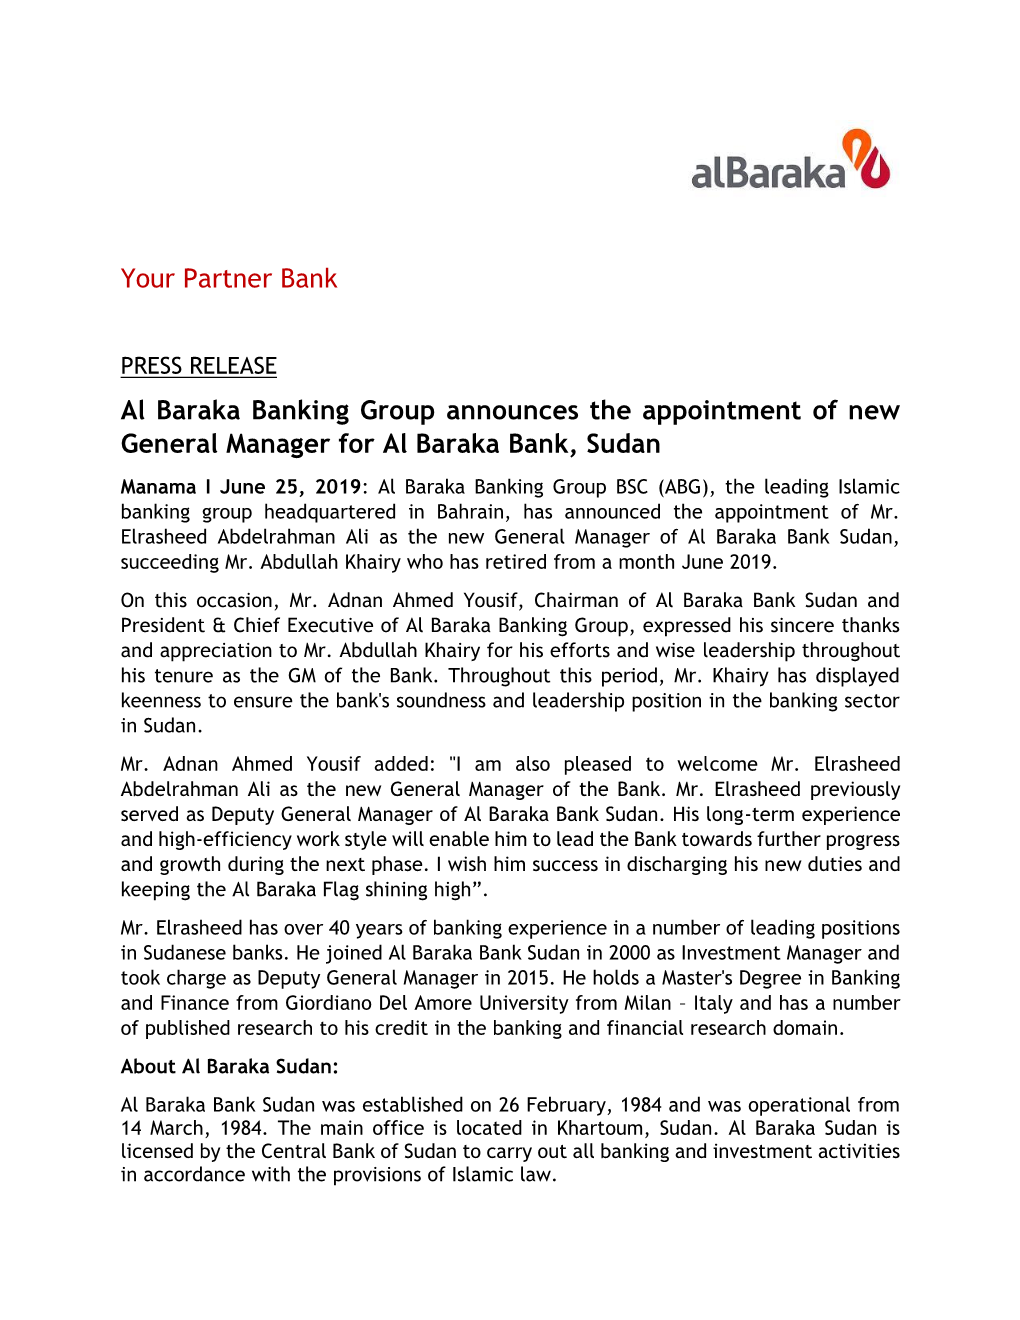 Your Partner Bank Al Baraka Banking Group Announces the Appointment of New General Manager for Al Baraka Bank, Sudan